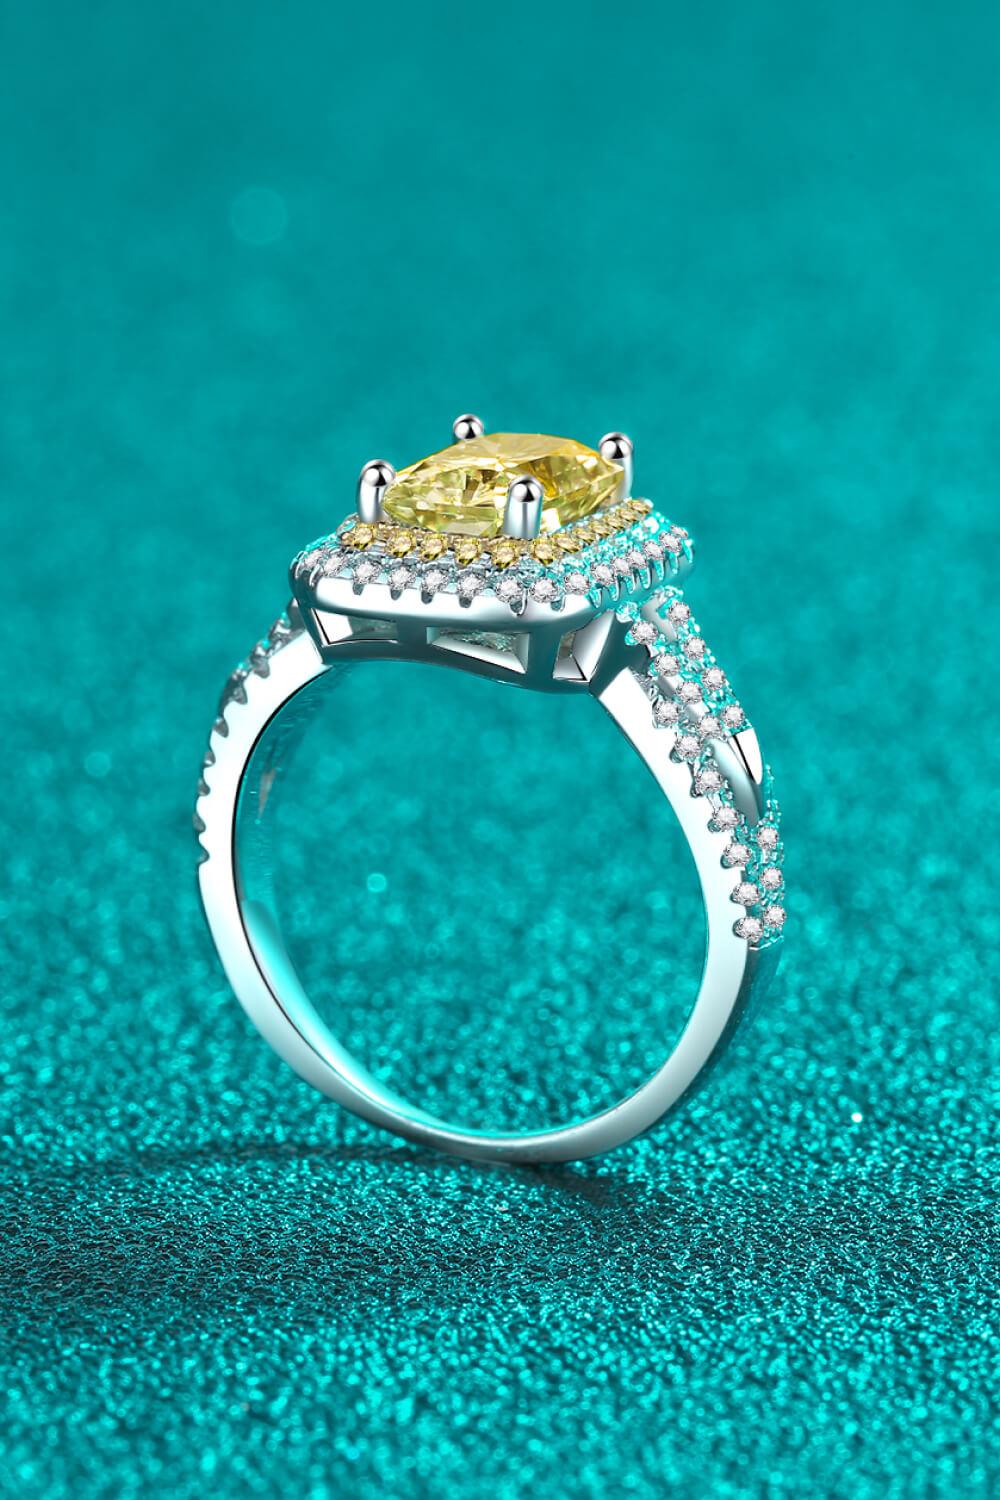 Can't Stop Your Shine 2 Carat Moissanite Ring - Trendha